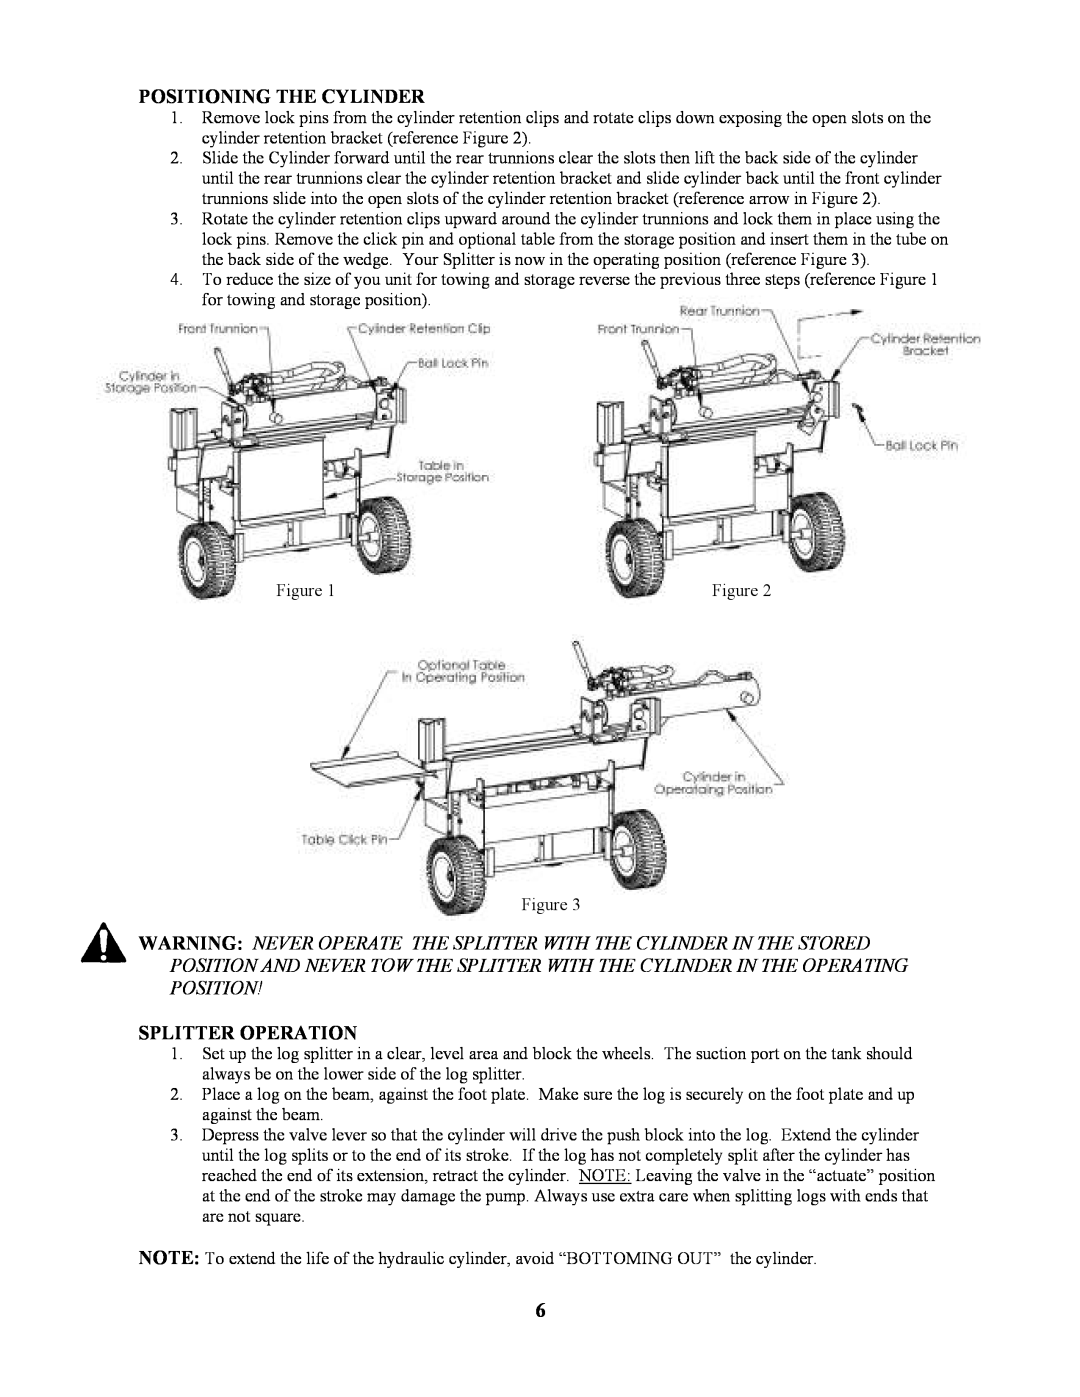 Swisher LS422X owner manual Positioning The Cylinder, Splitter Operation 